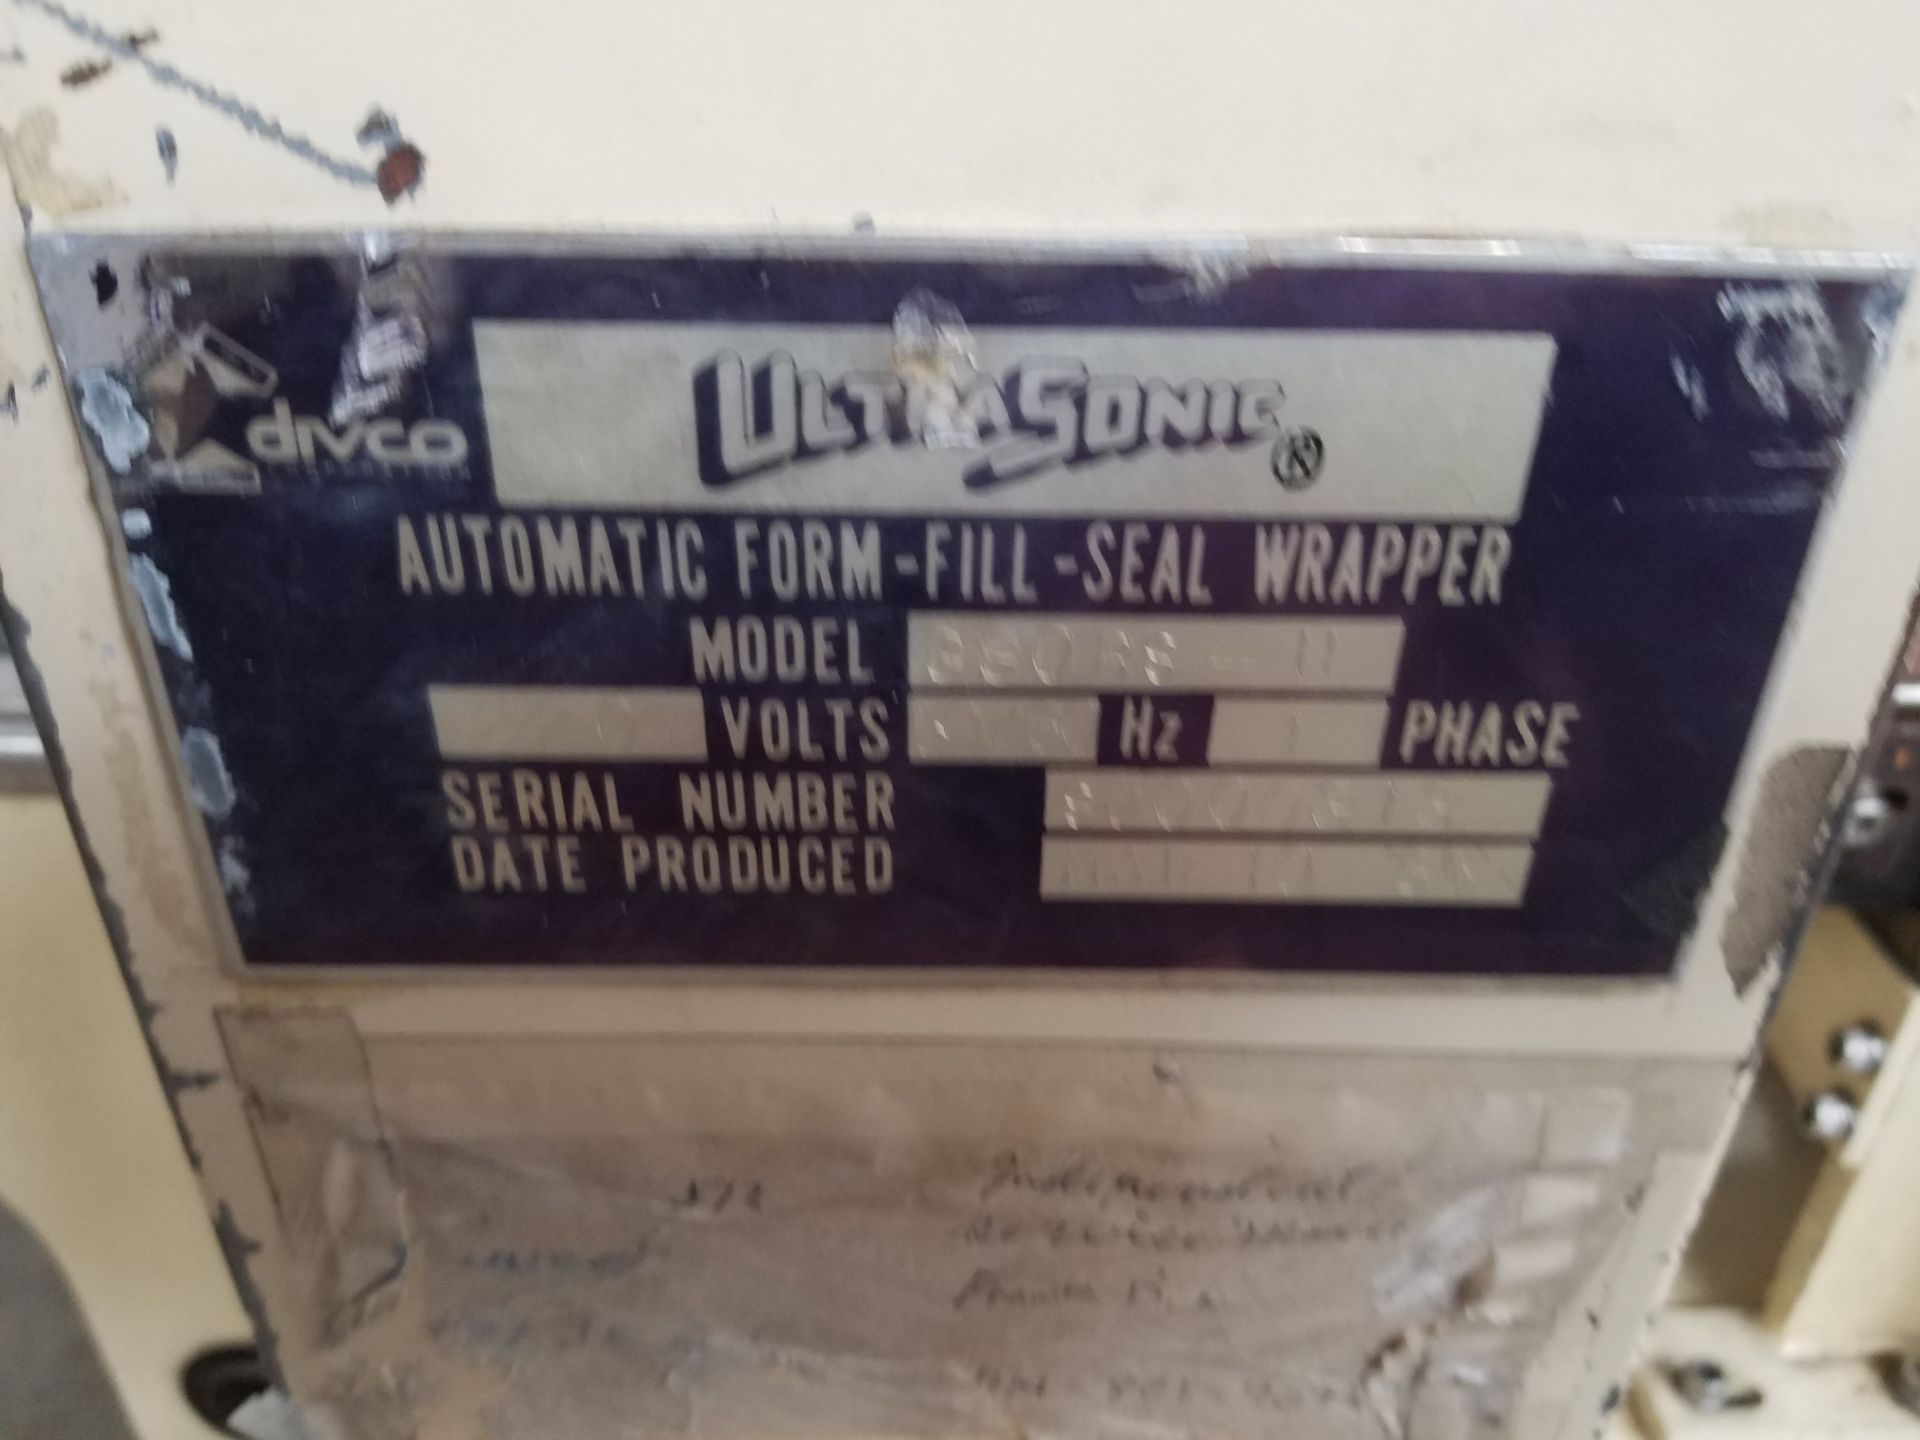 Ultra sonic 38085 11 automatic form-fill-seal wrapper, serial # 55000813, volt 220, 1-phase - Image 3 of 5